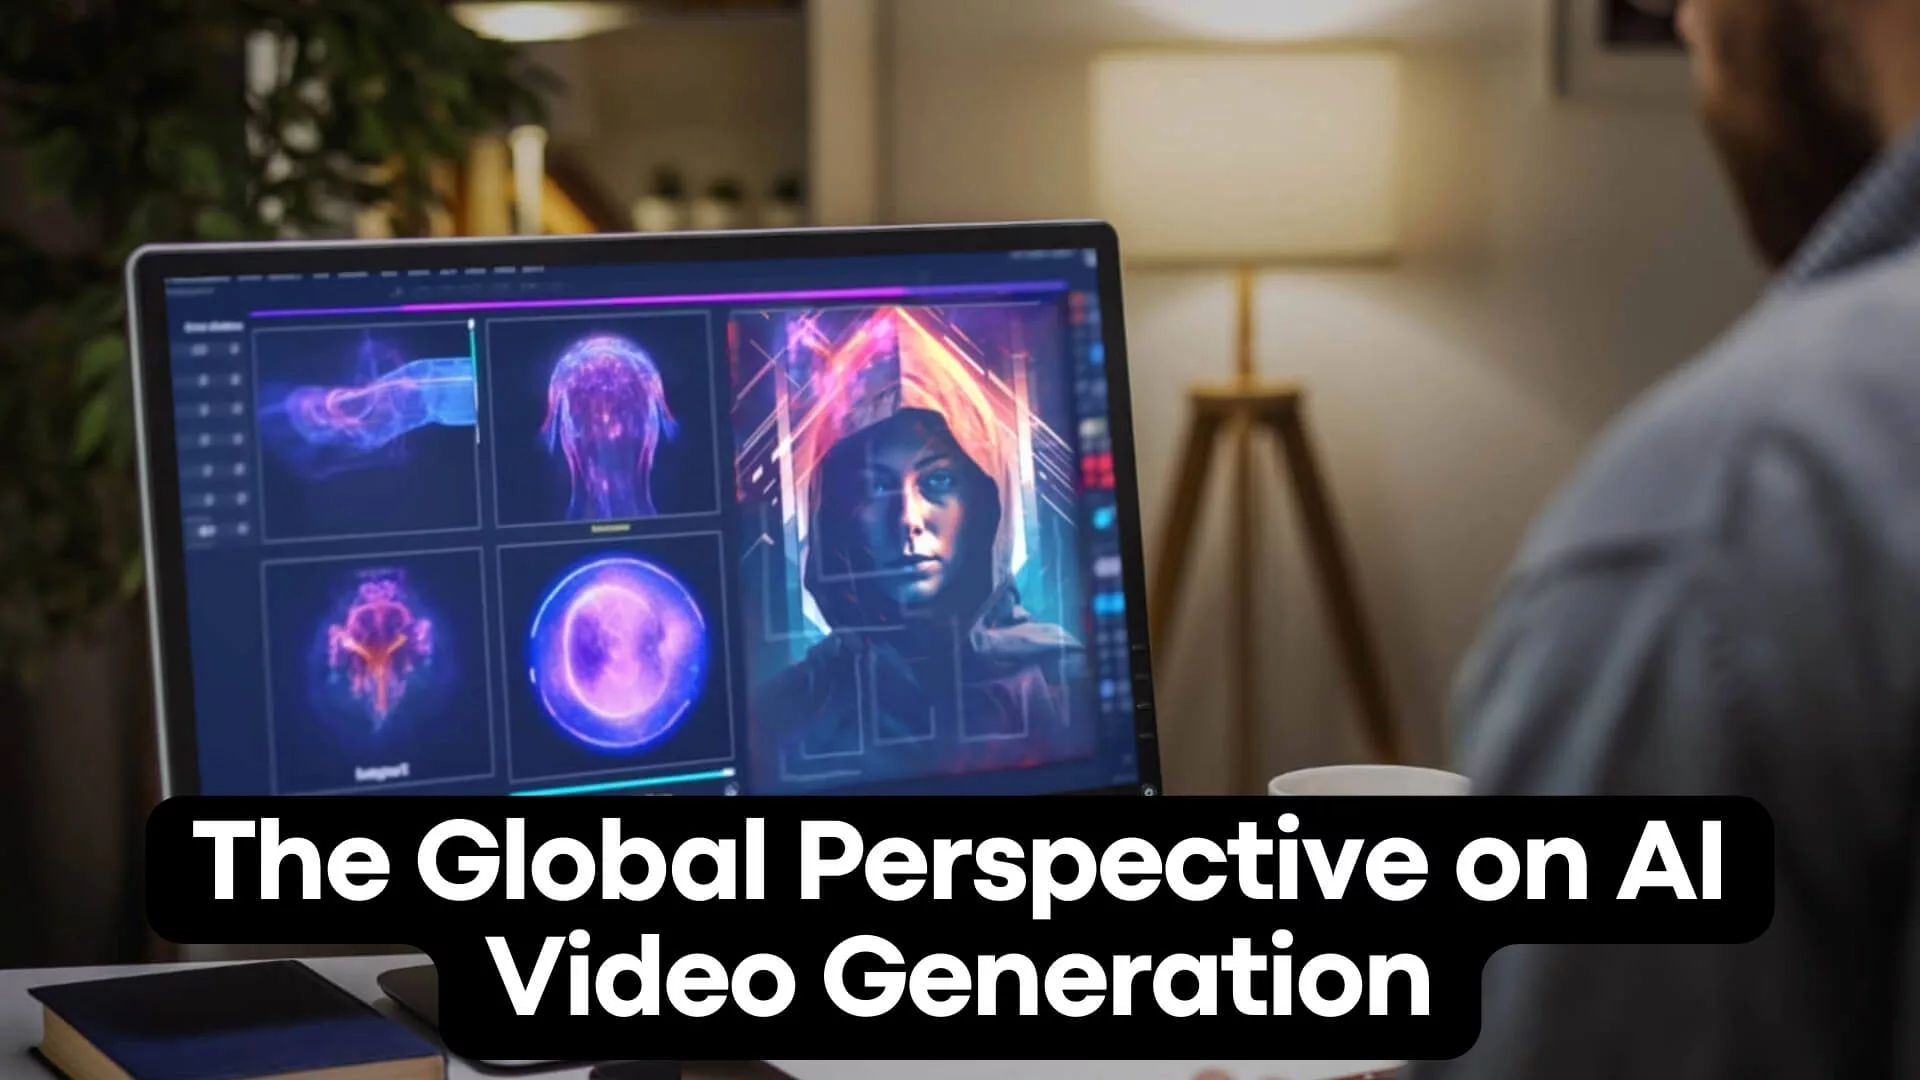 The Global Perspective on AI Video Generation